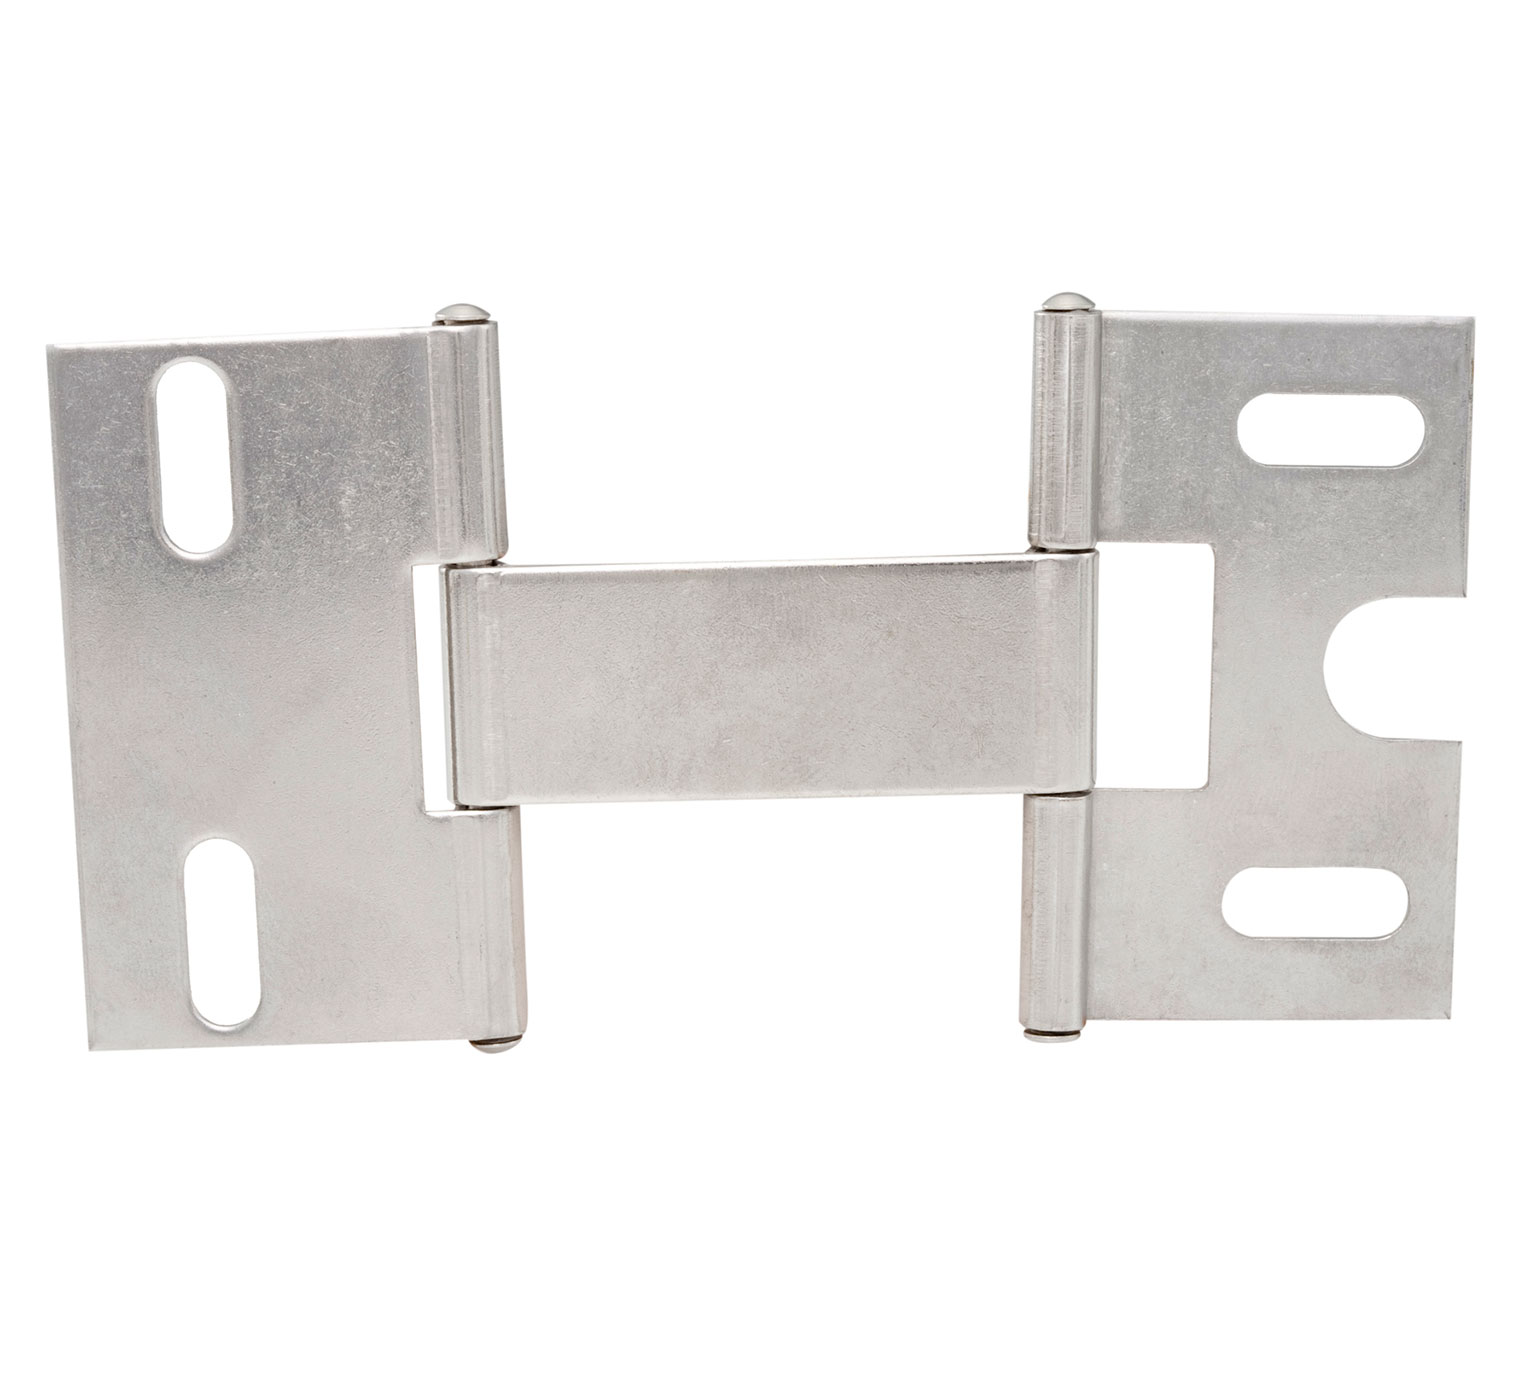 1021246 Stainless Steel Hinge - 5.67 x 2.953 x 0.315 in alt 1